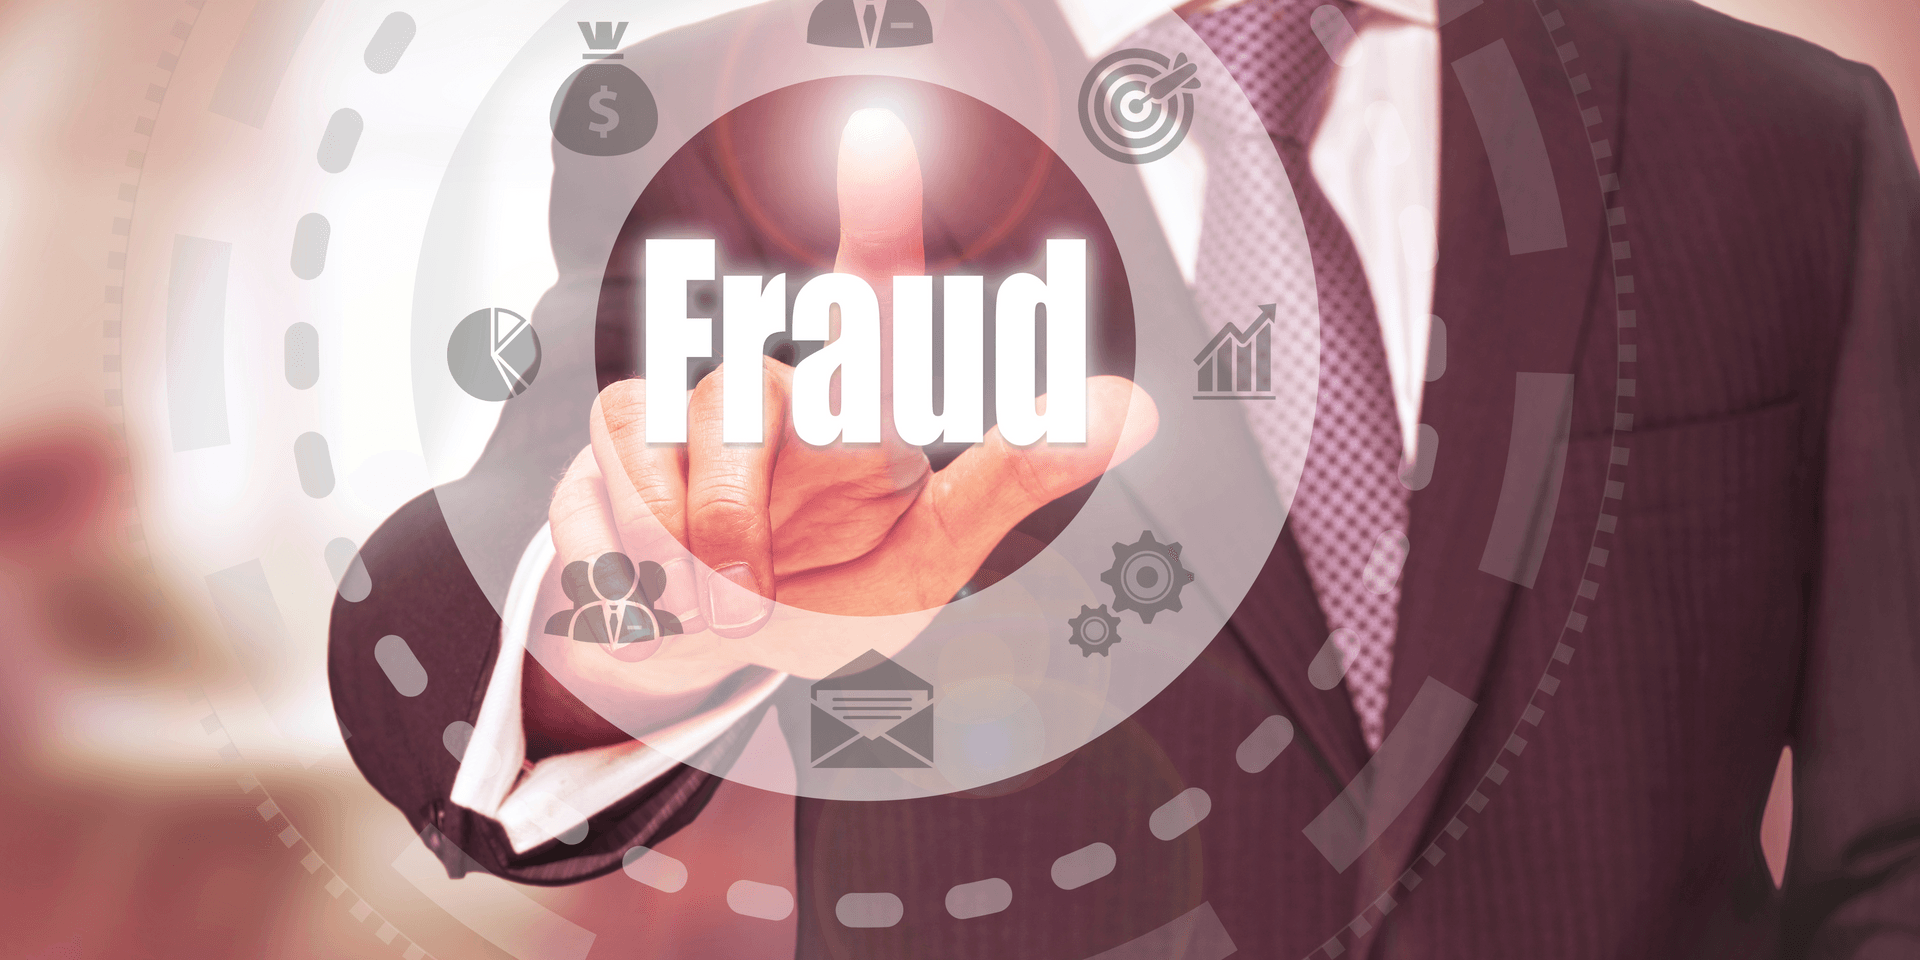 Fraud Prevention Month: Protect Your Finances with Expert Tips and Educational Content